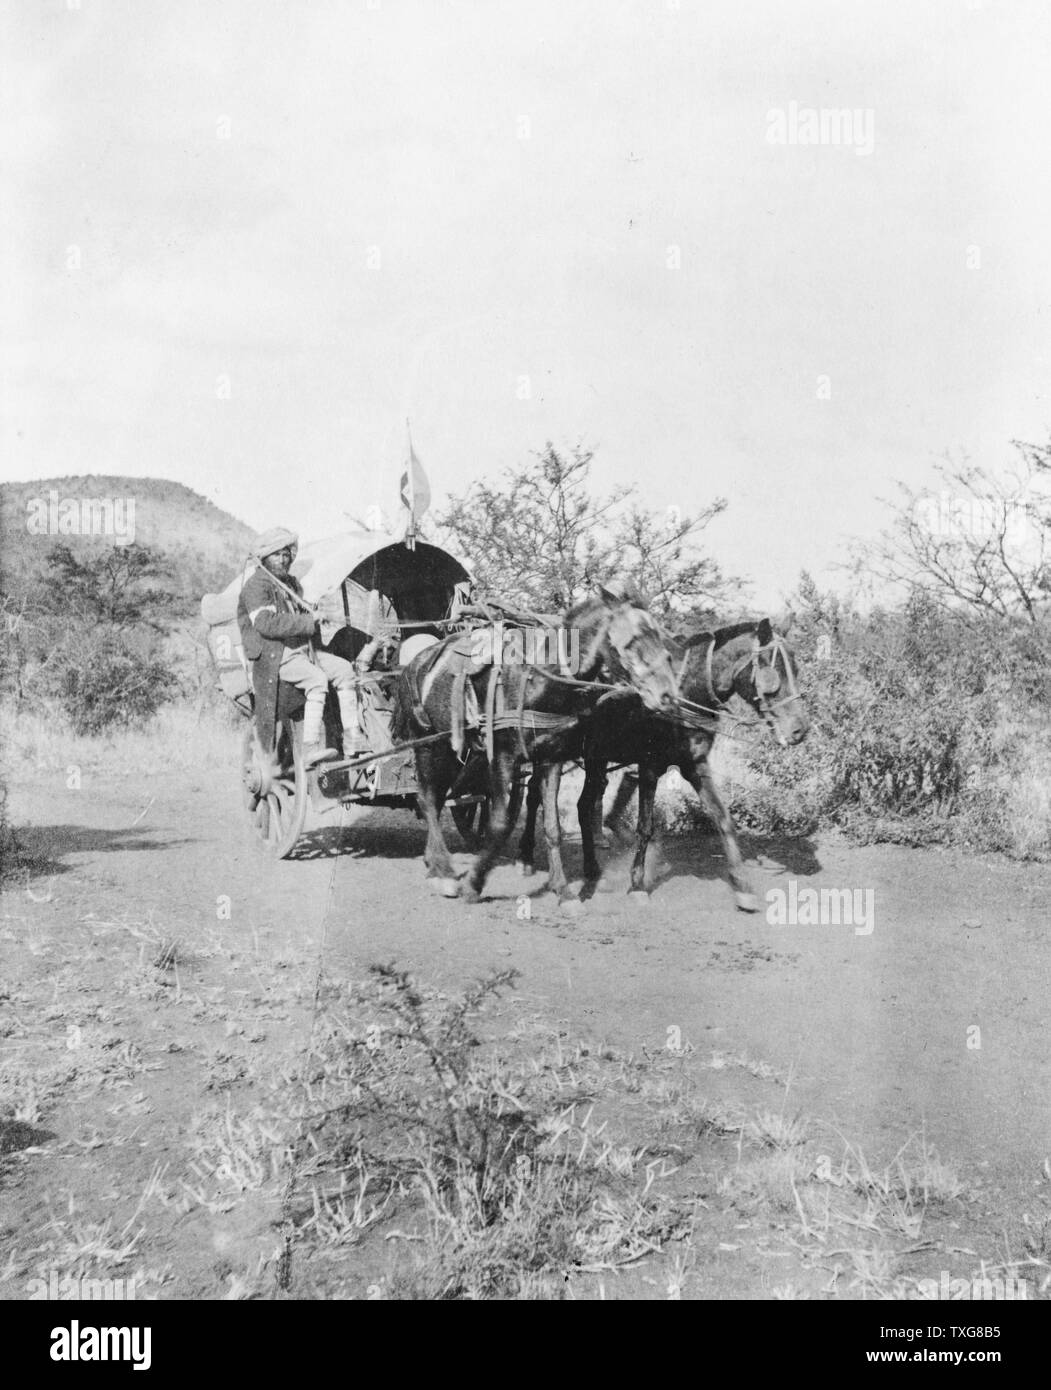 Second Boer War 1899-1902 : Horse-drawn covered hospital cart with Indian driver used by British in South Africa during the Boer War.  Medicine Ambulance  Military British Colonialism Stock Photo